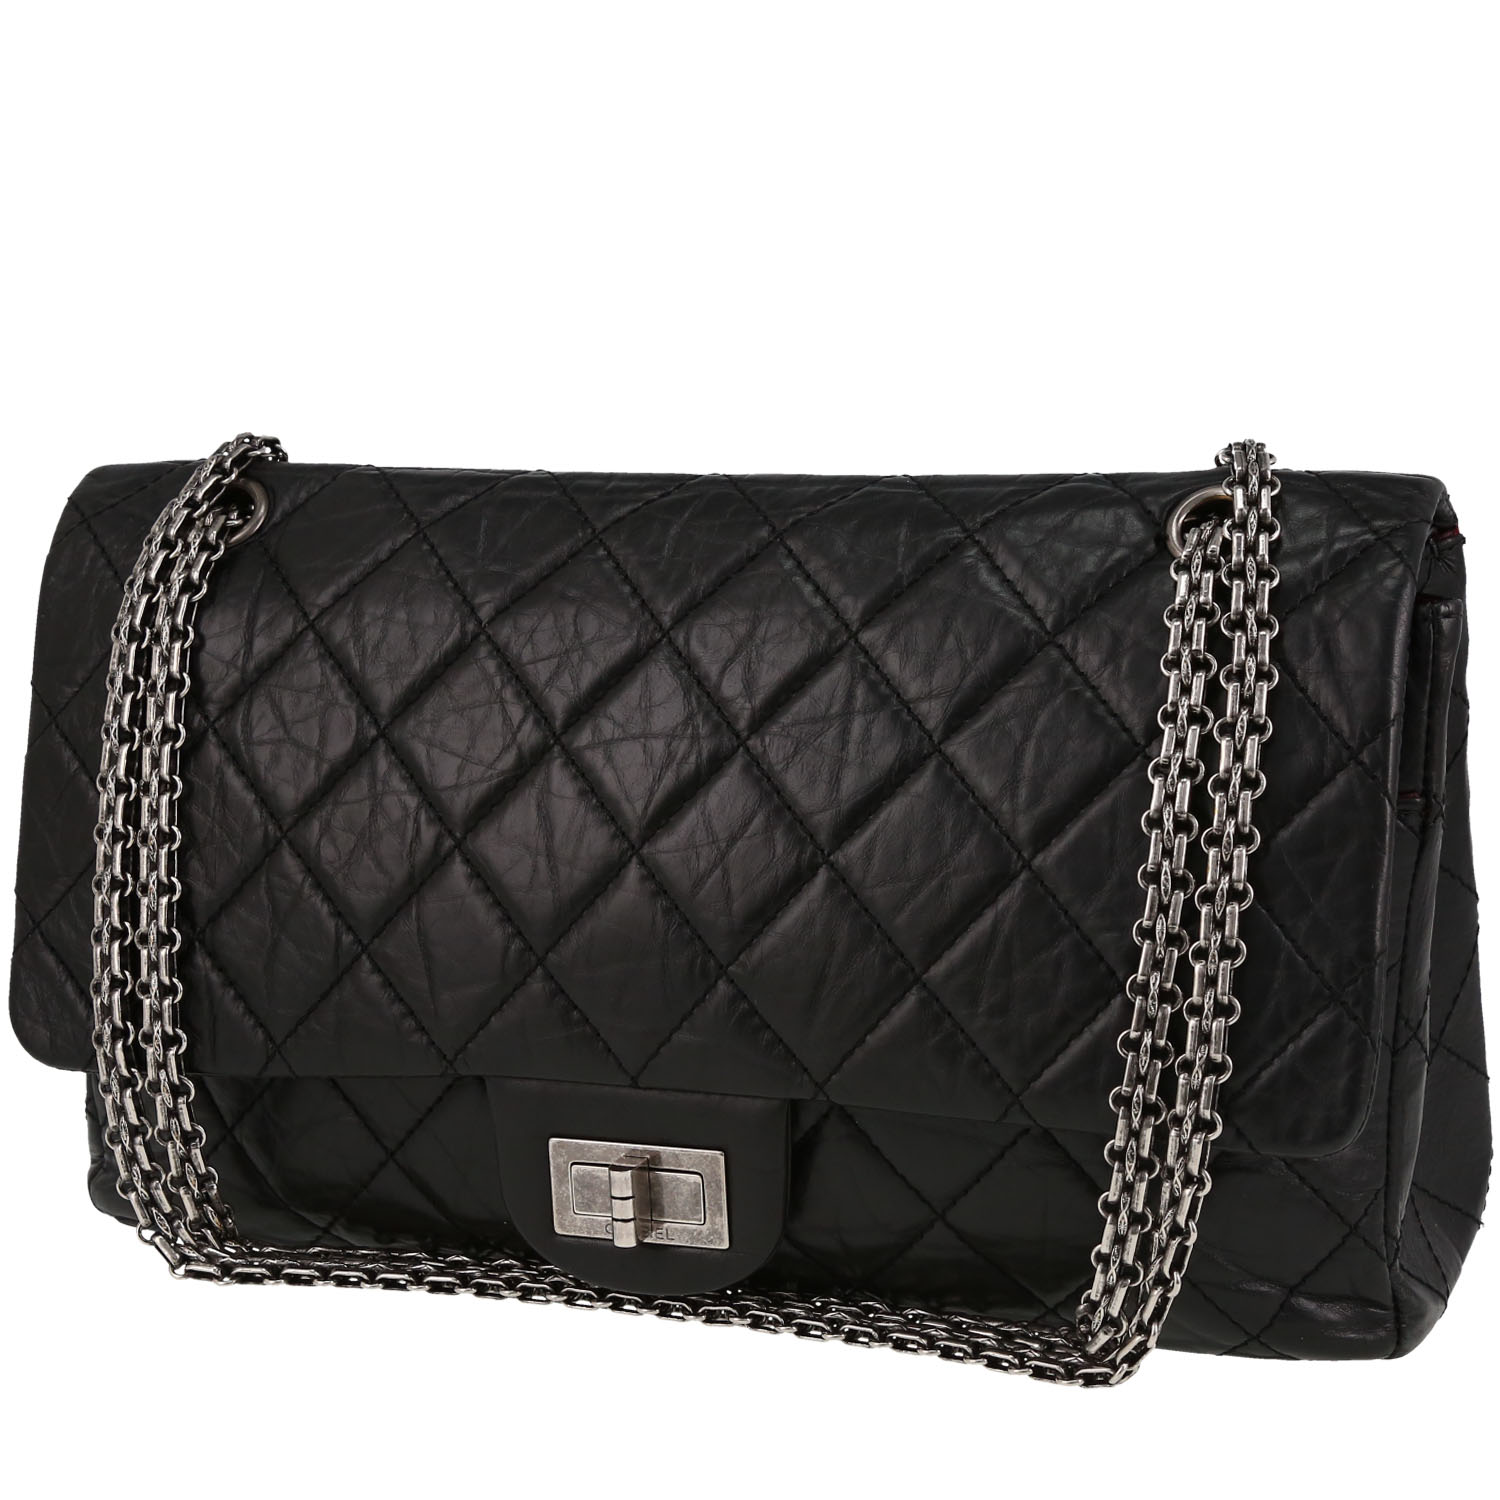 Chanel Chanel 2.55 Large Model Handbag in Black Quilted Leather